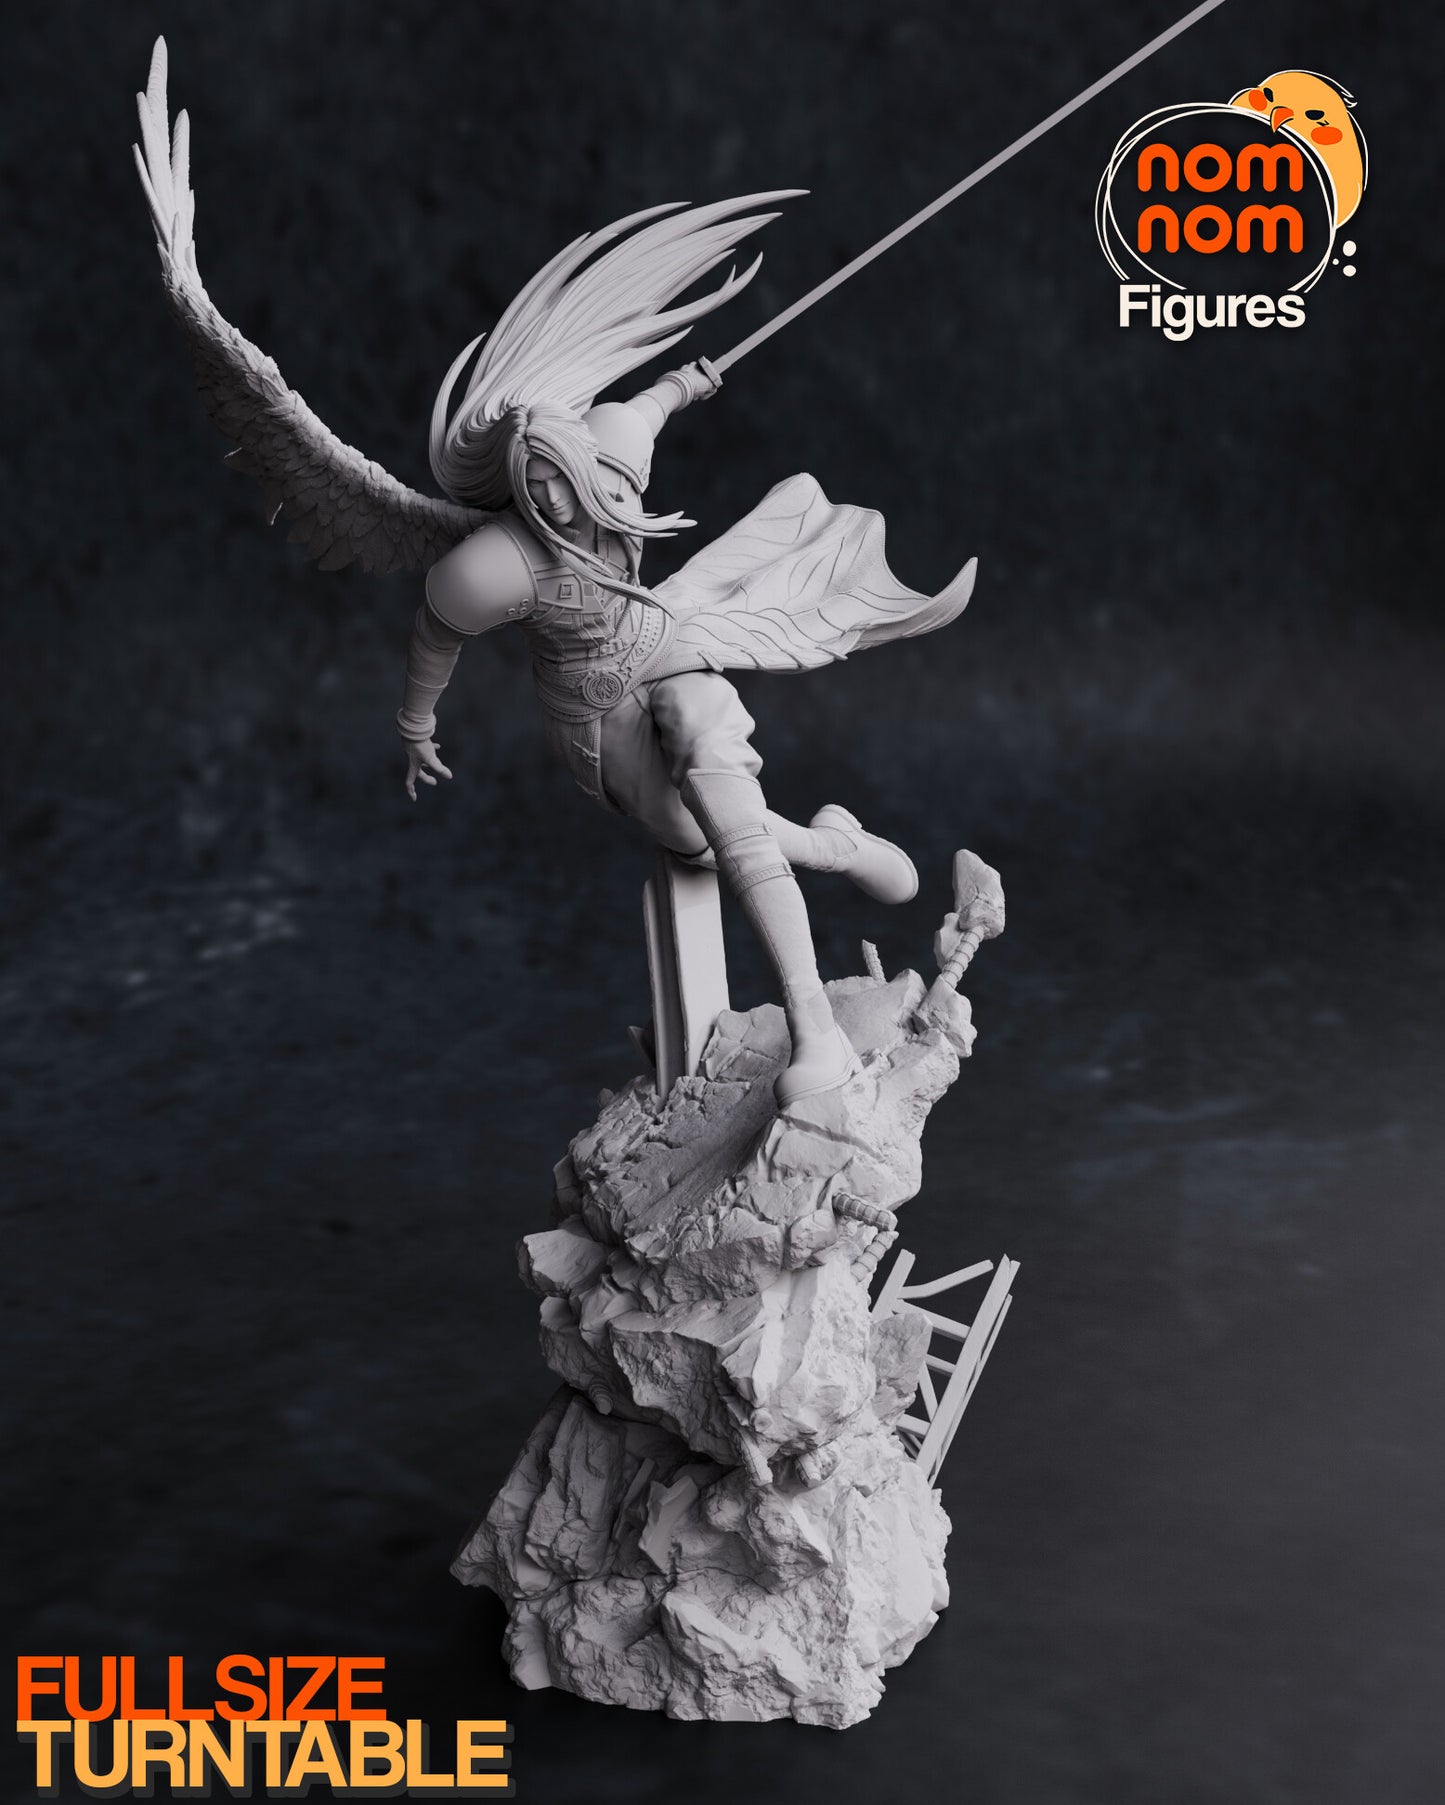 Sephiroth - Final Fantasy VII 3D Printed Fanmade Model by Nomnom Figures